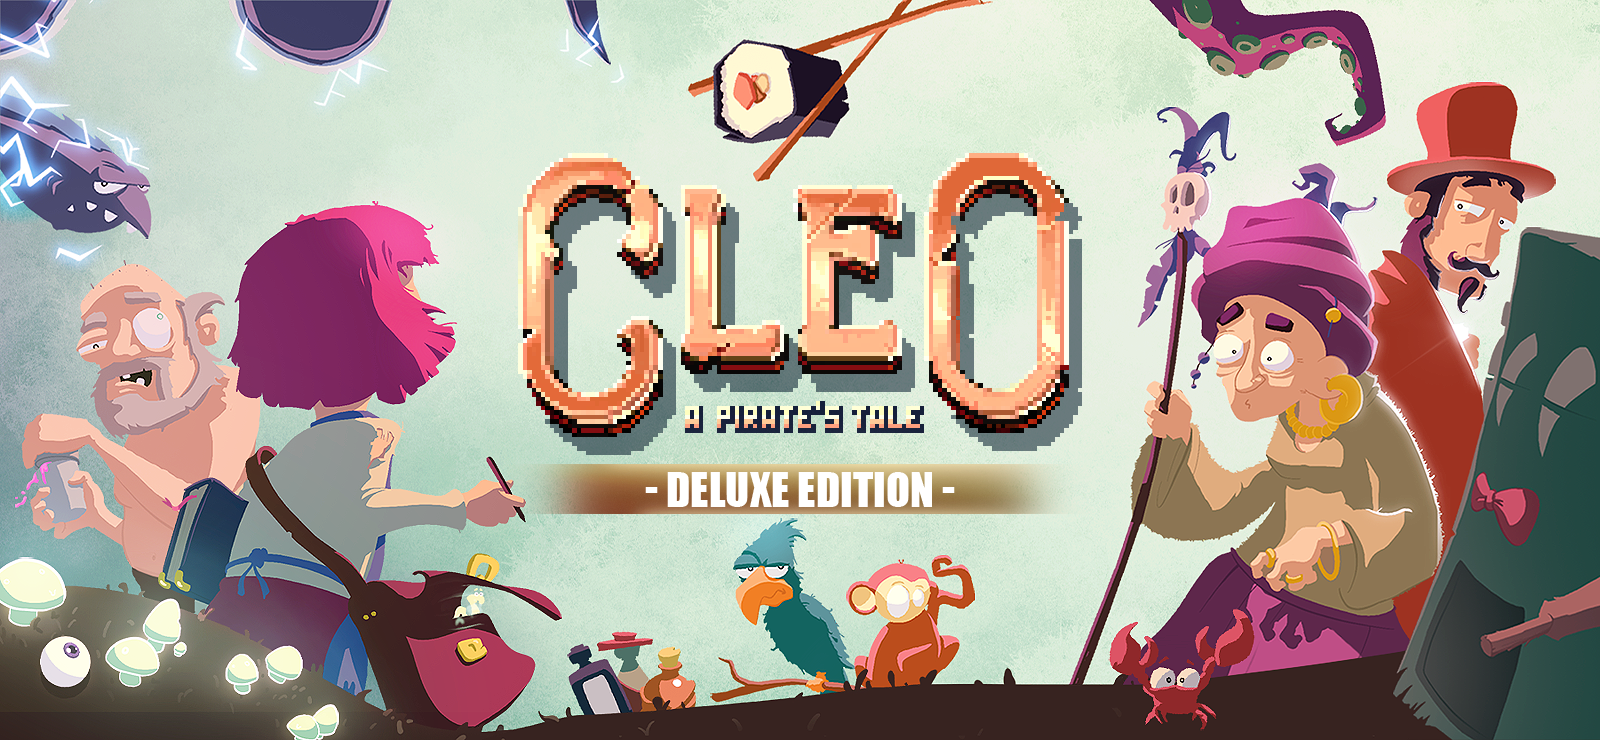 Cleo - A Pirate’s Tale - Deluxe Edition